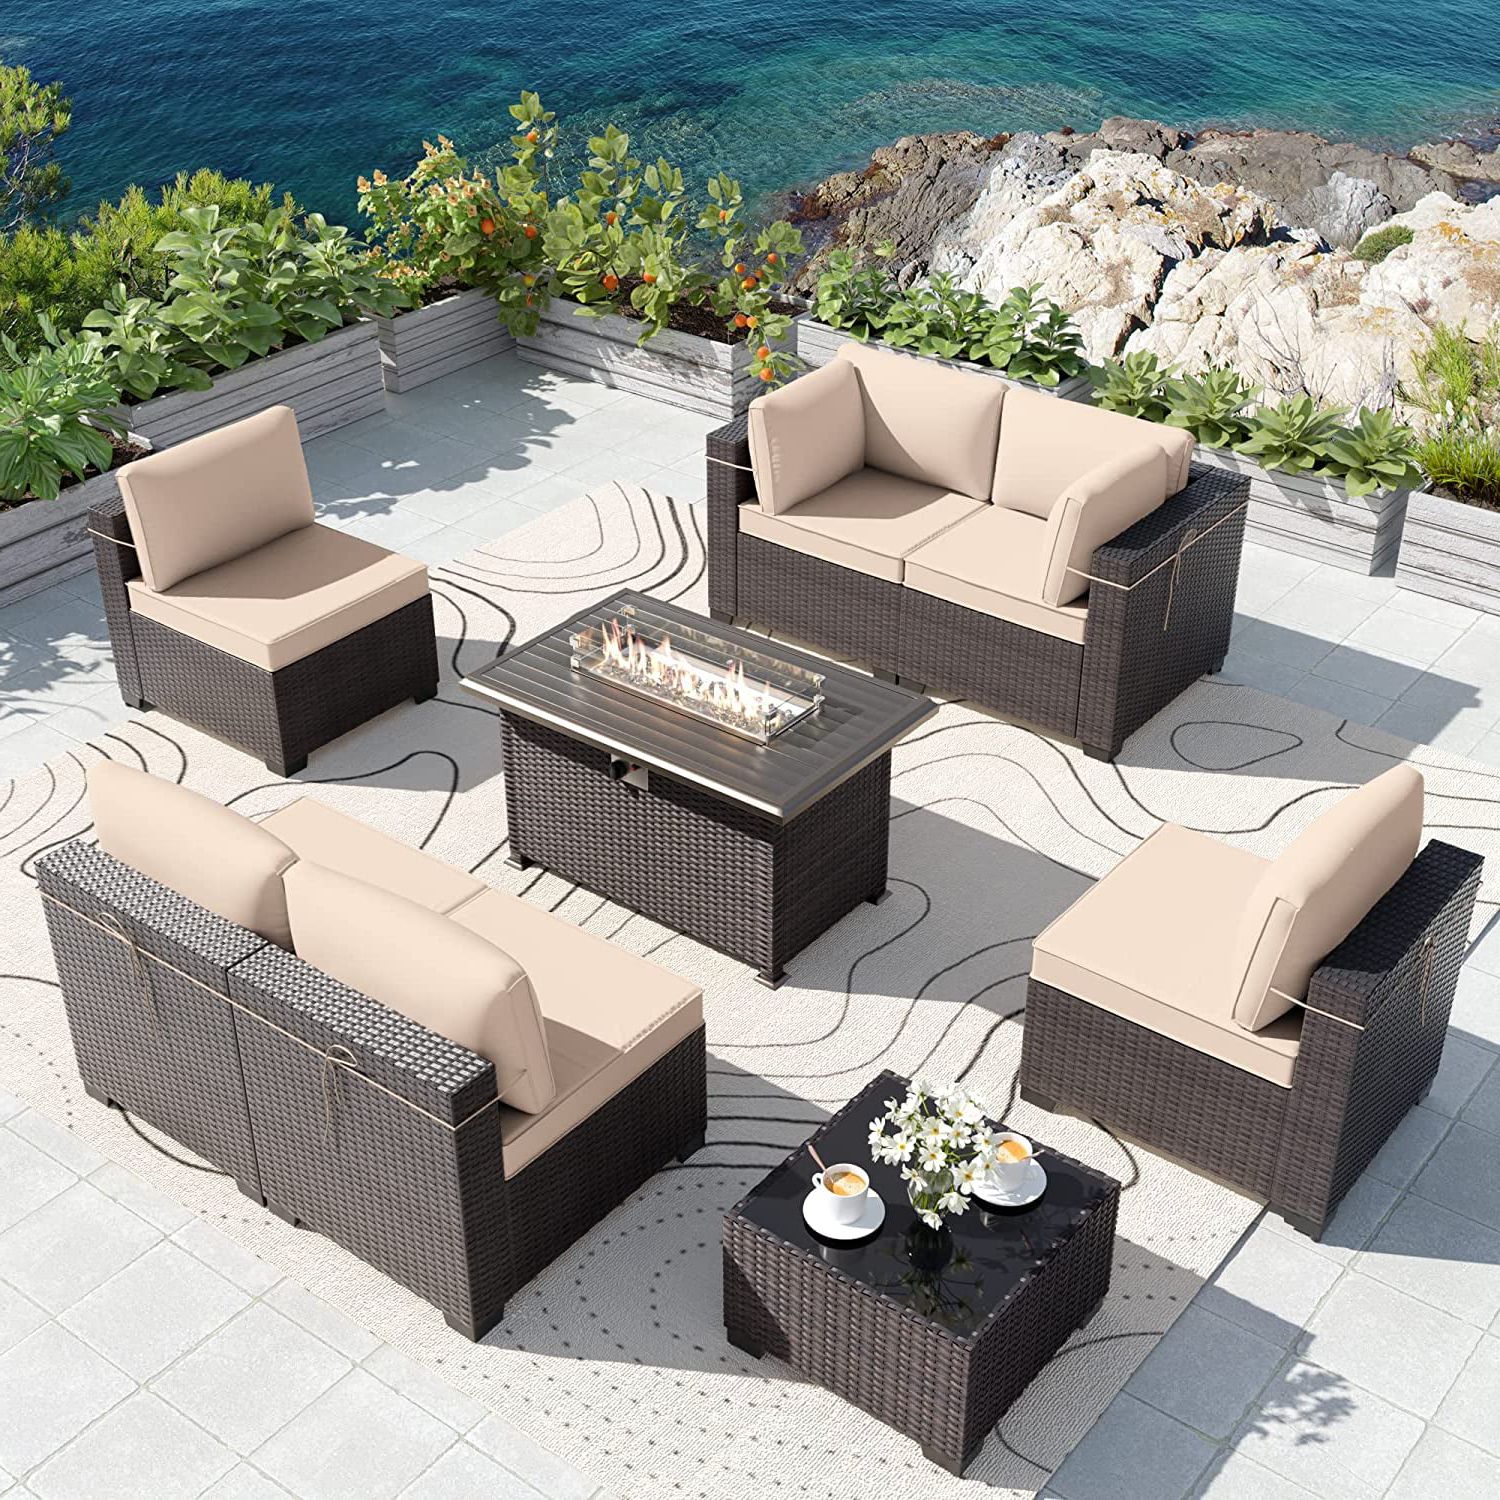 8 Pcs Outdoor Patio Furniture Set For Well Known Gotland Outdoor Patio Furniture Set With 43" Propane Fire Pit Table, 8  Pieces Conversation Sets Wicker,sand – Walmart (View 5 of 15)